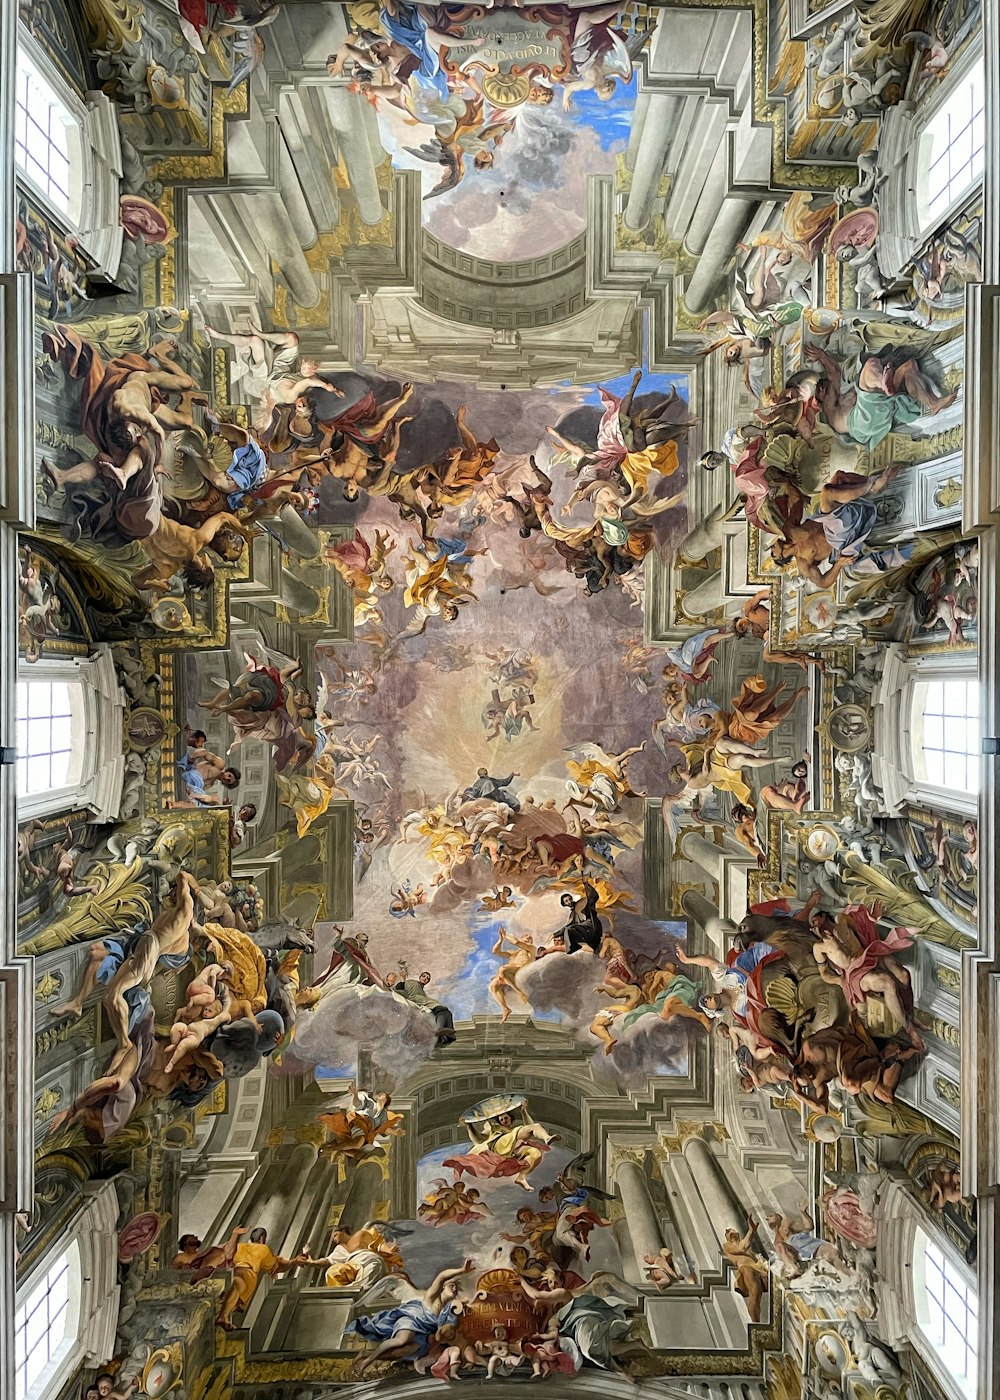 the ceiling of a building with many paintings on it